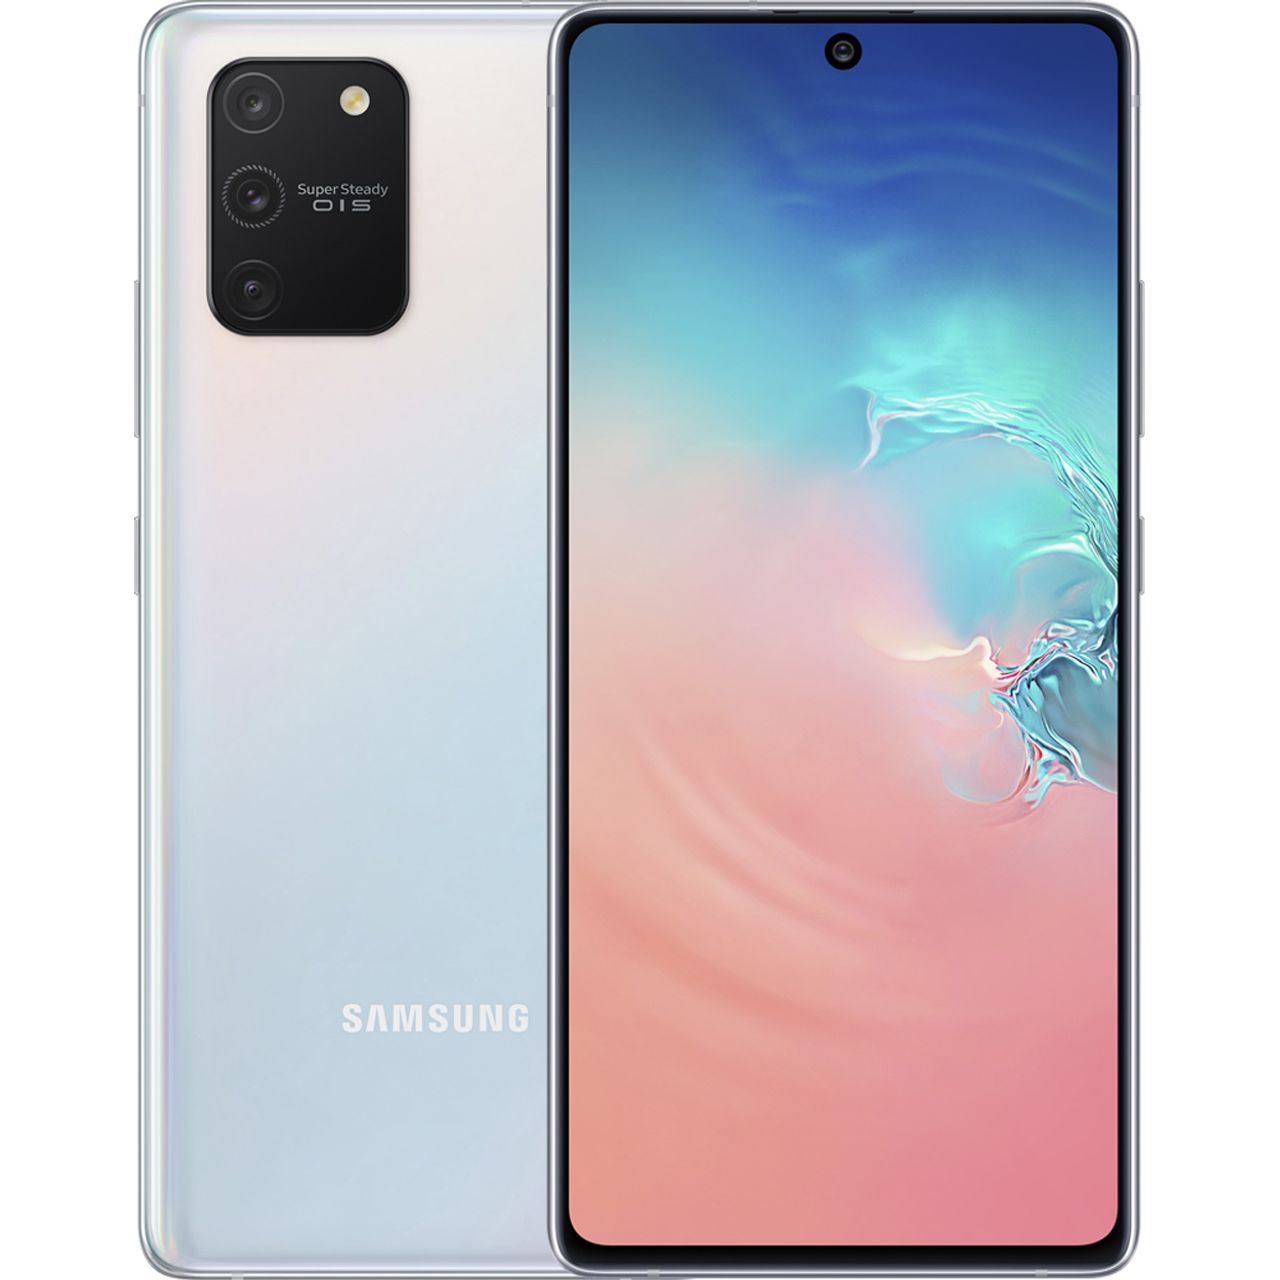 Samsung Galaxy S10 Lite Smartphone in White Review